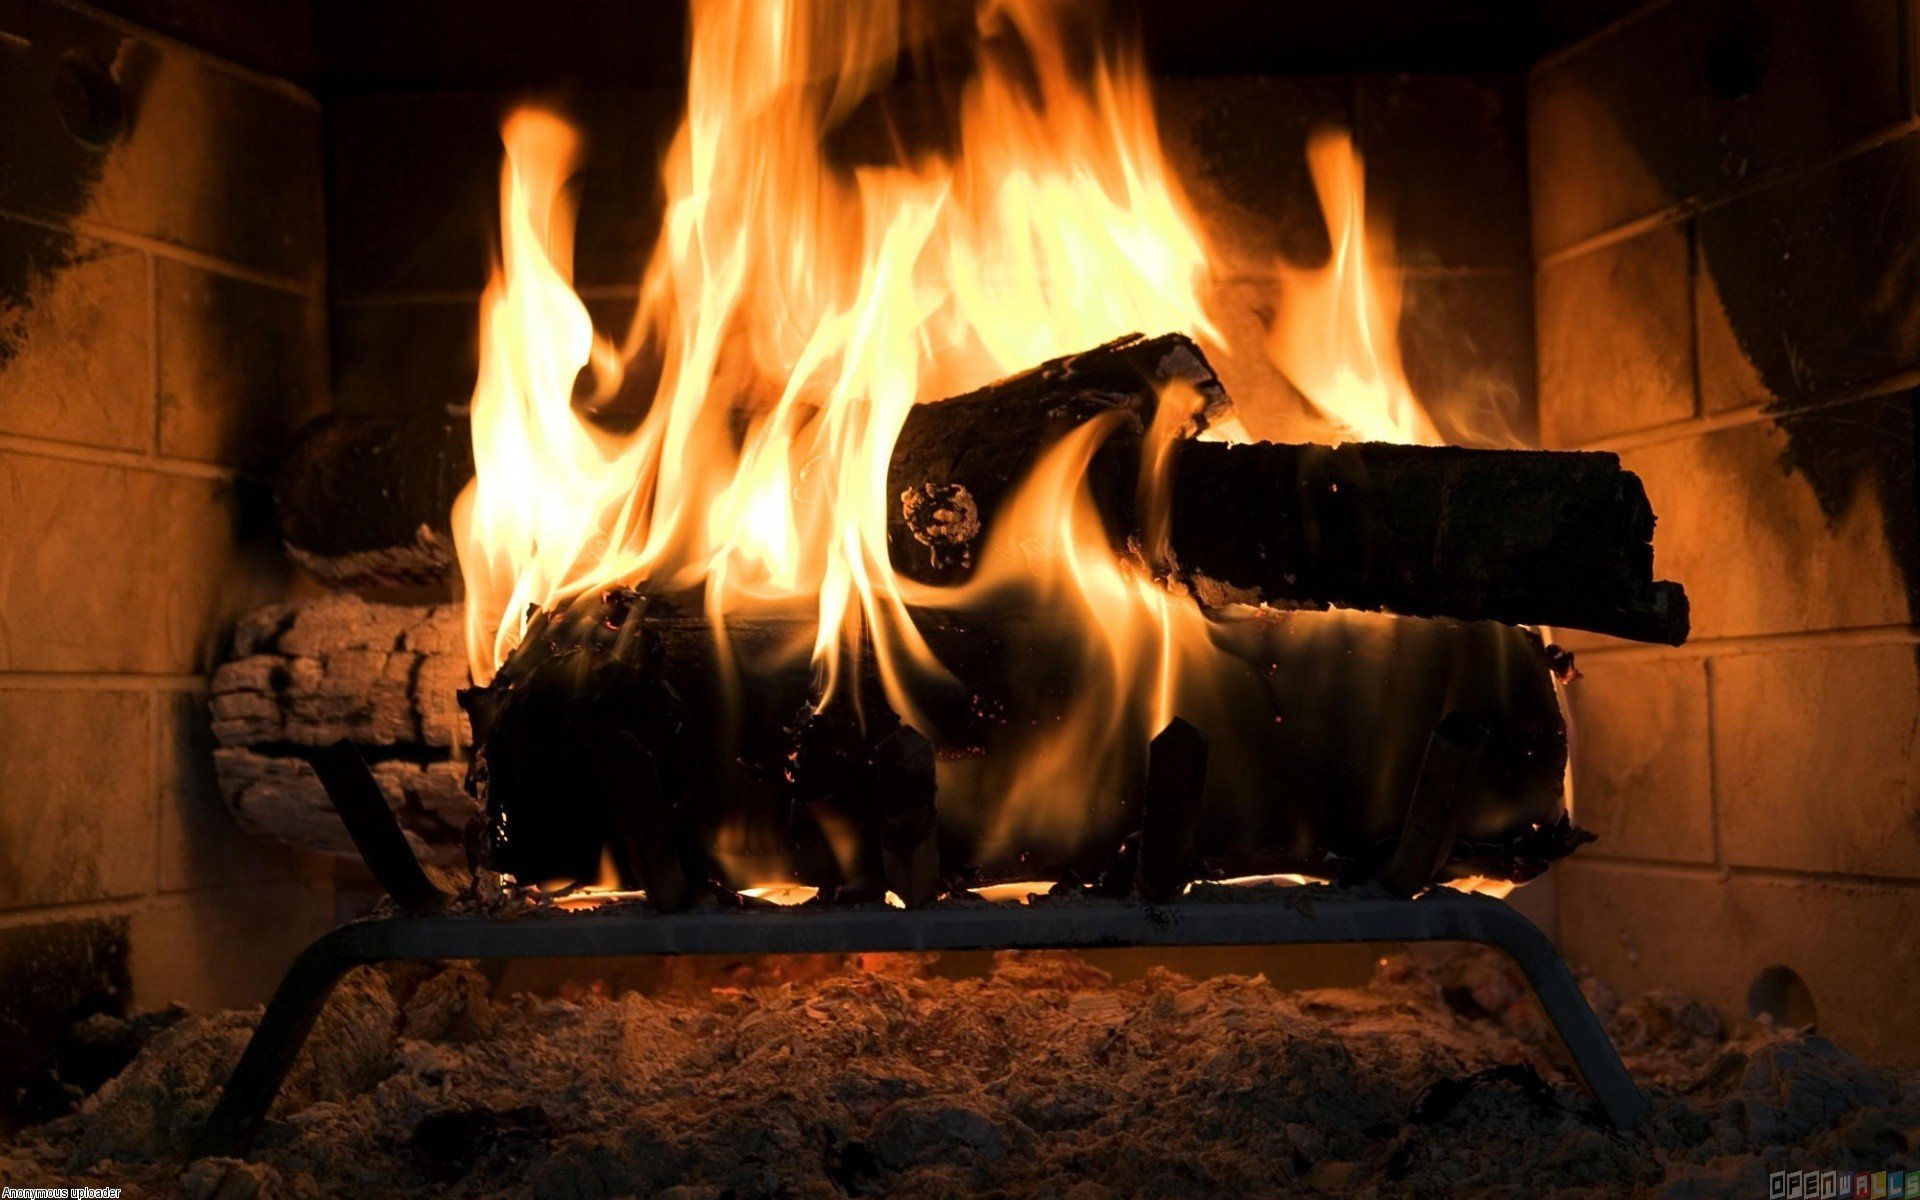 48+] Wallpaper Fireplace with Flames Live - WallpaperSafari